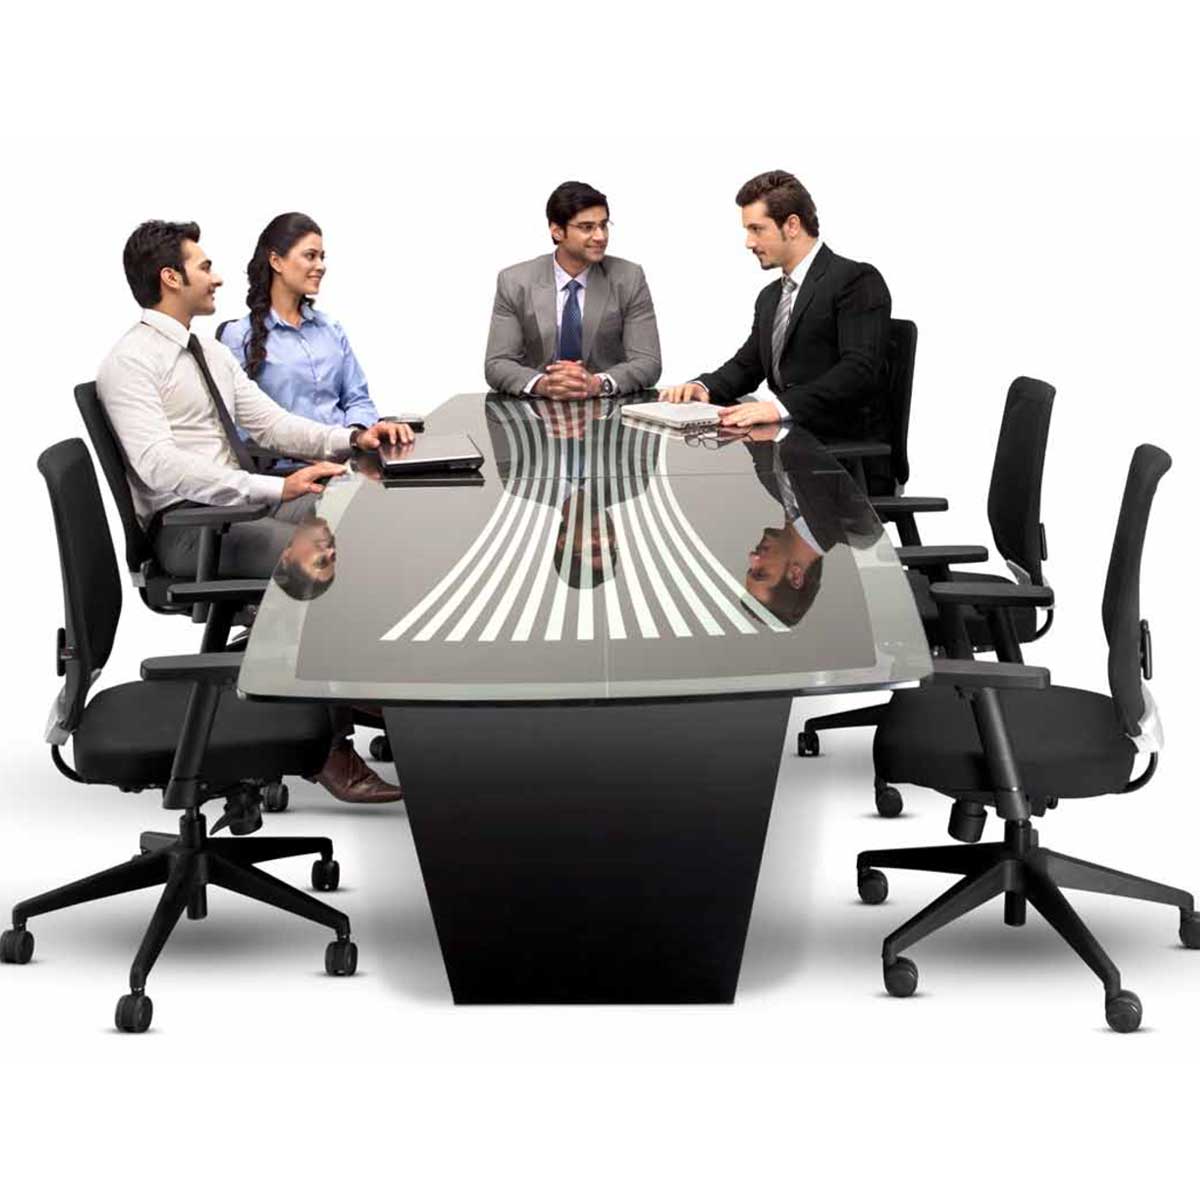 Conference table Manufacturers, Suppliers in Saket